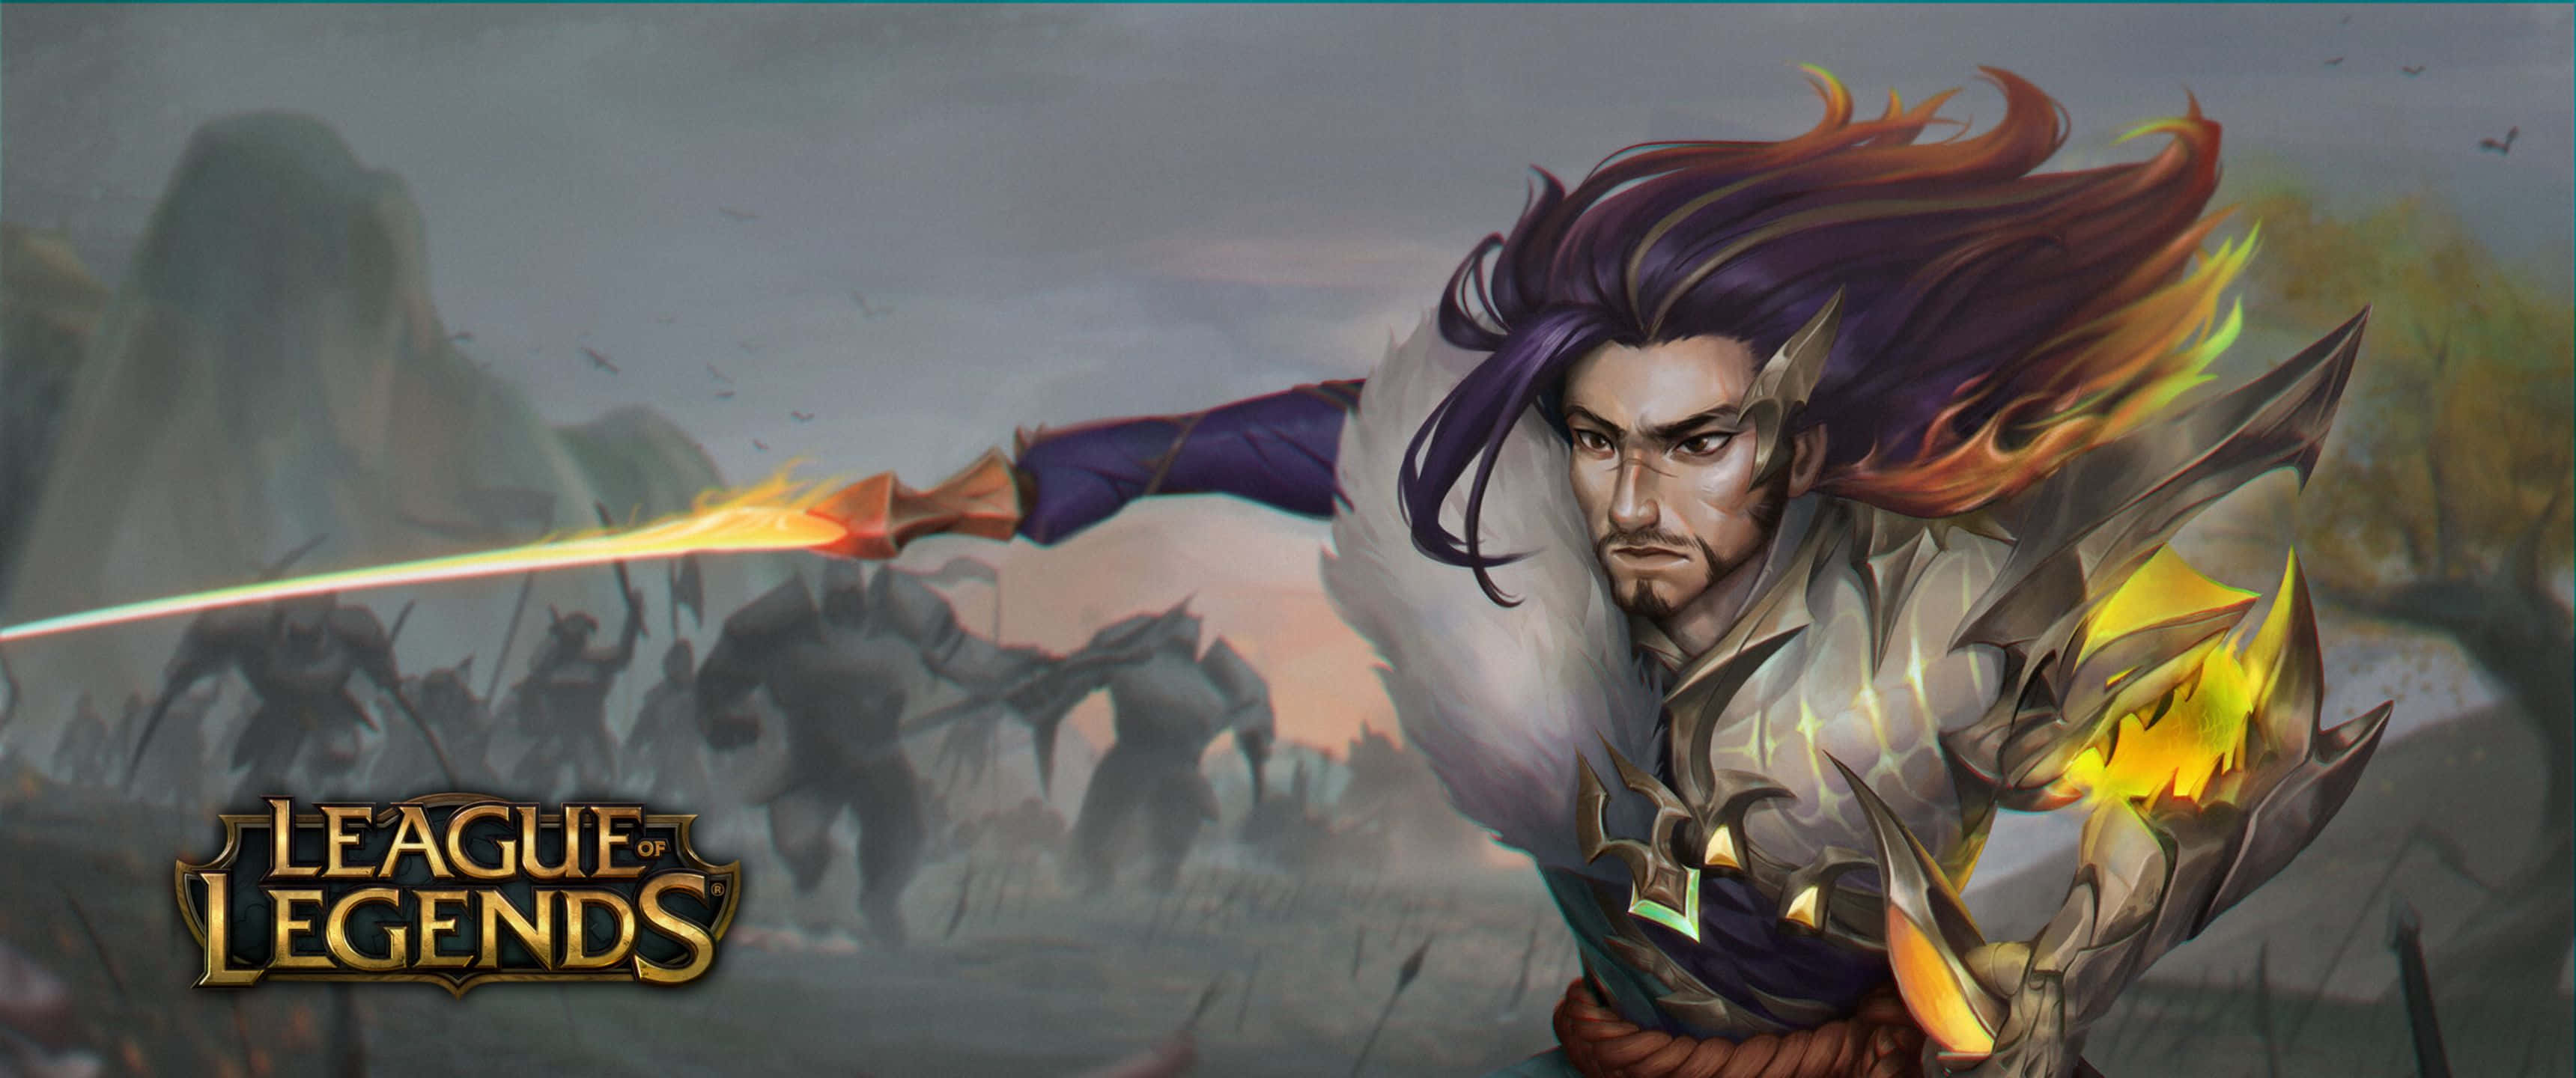 Truth Dragon Yasuo 3440x1440p League Of Legends Background